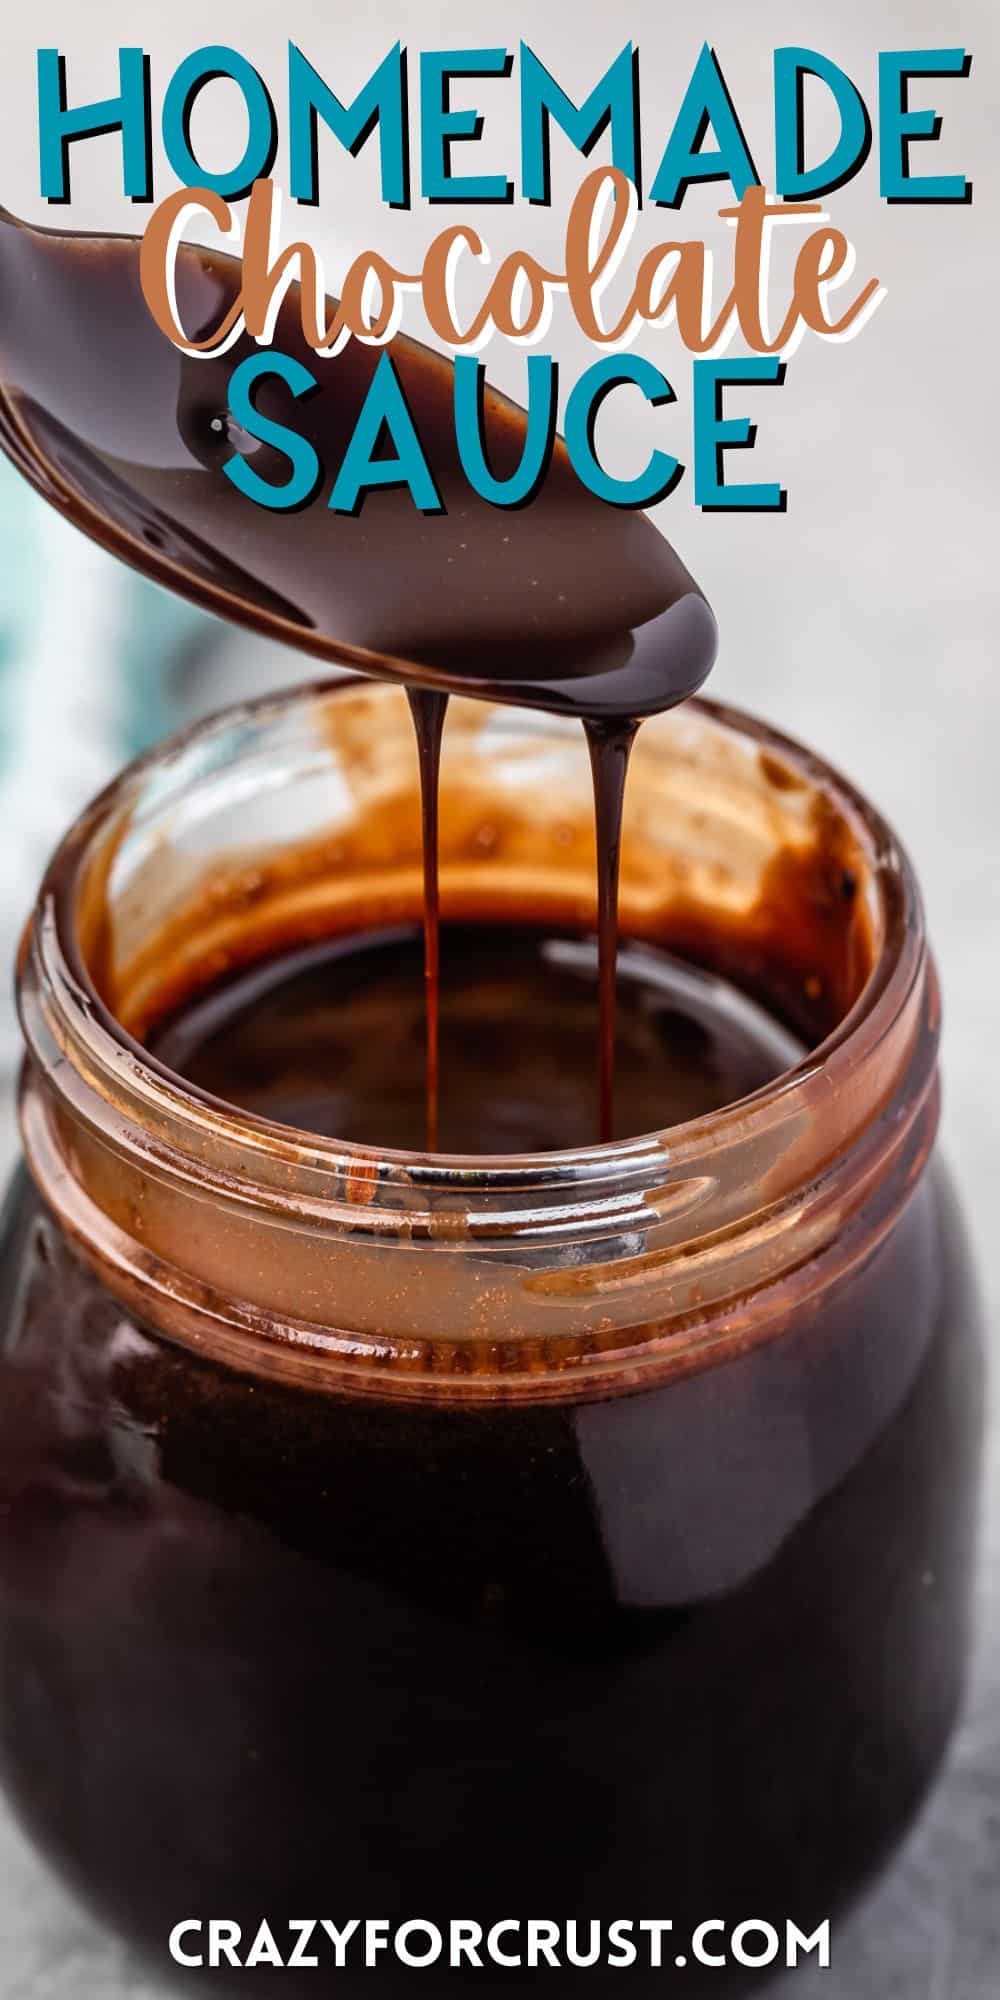 a spoon scooping chocolate sauce out of a clear jar with words on the image.